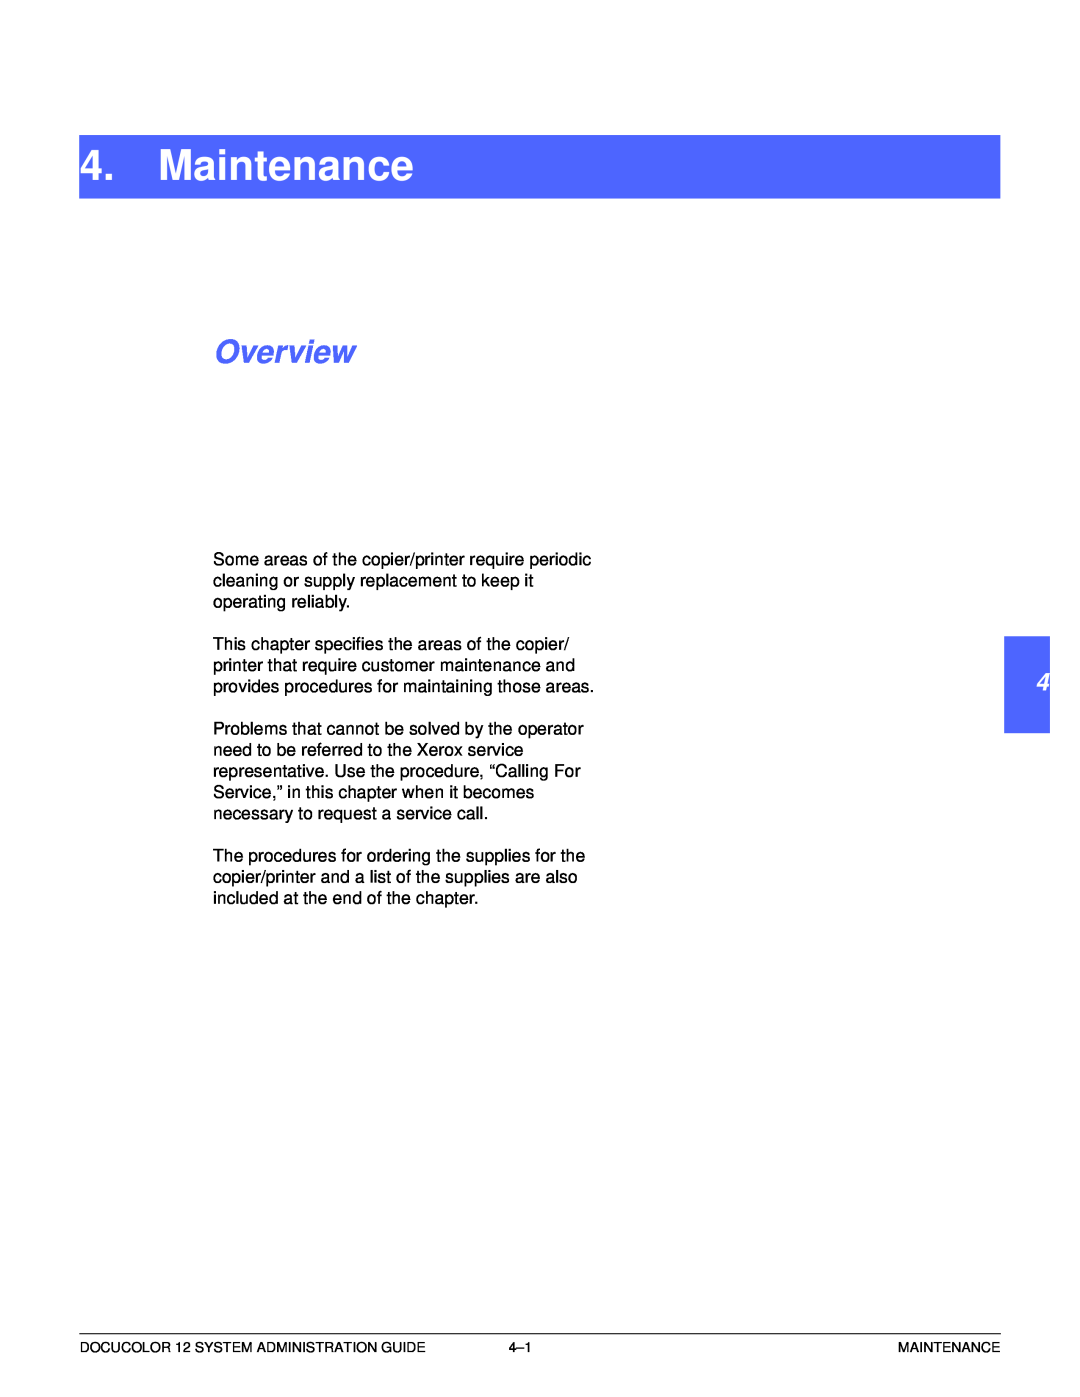 Xerox a2 manual Maintenance, Overview, 1 2 3 4 5 6 7, DOCUCOLOR 12 SYSTEM ADMINISTRATION GUIDE 